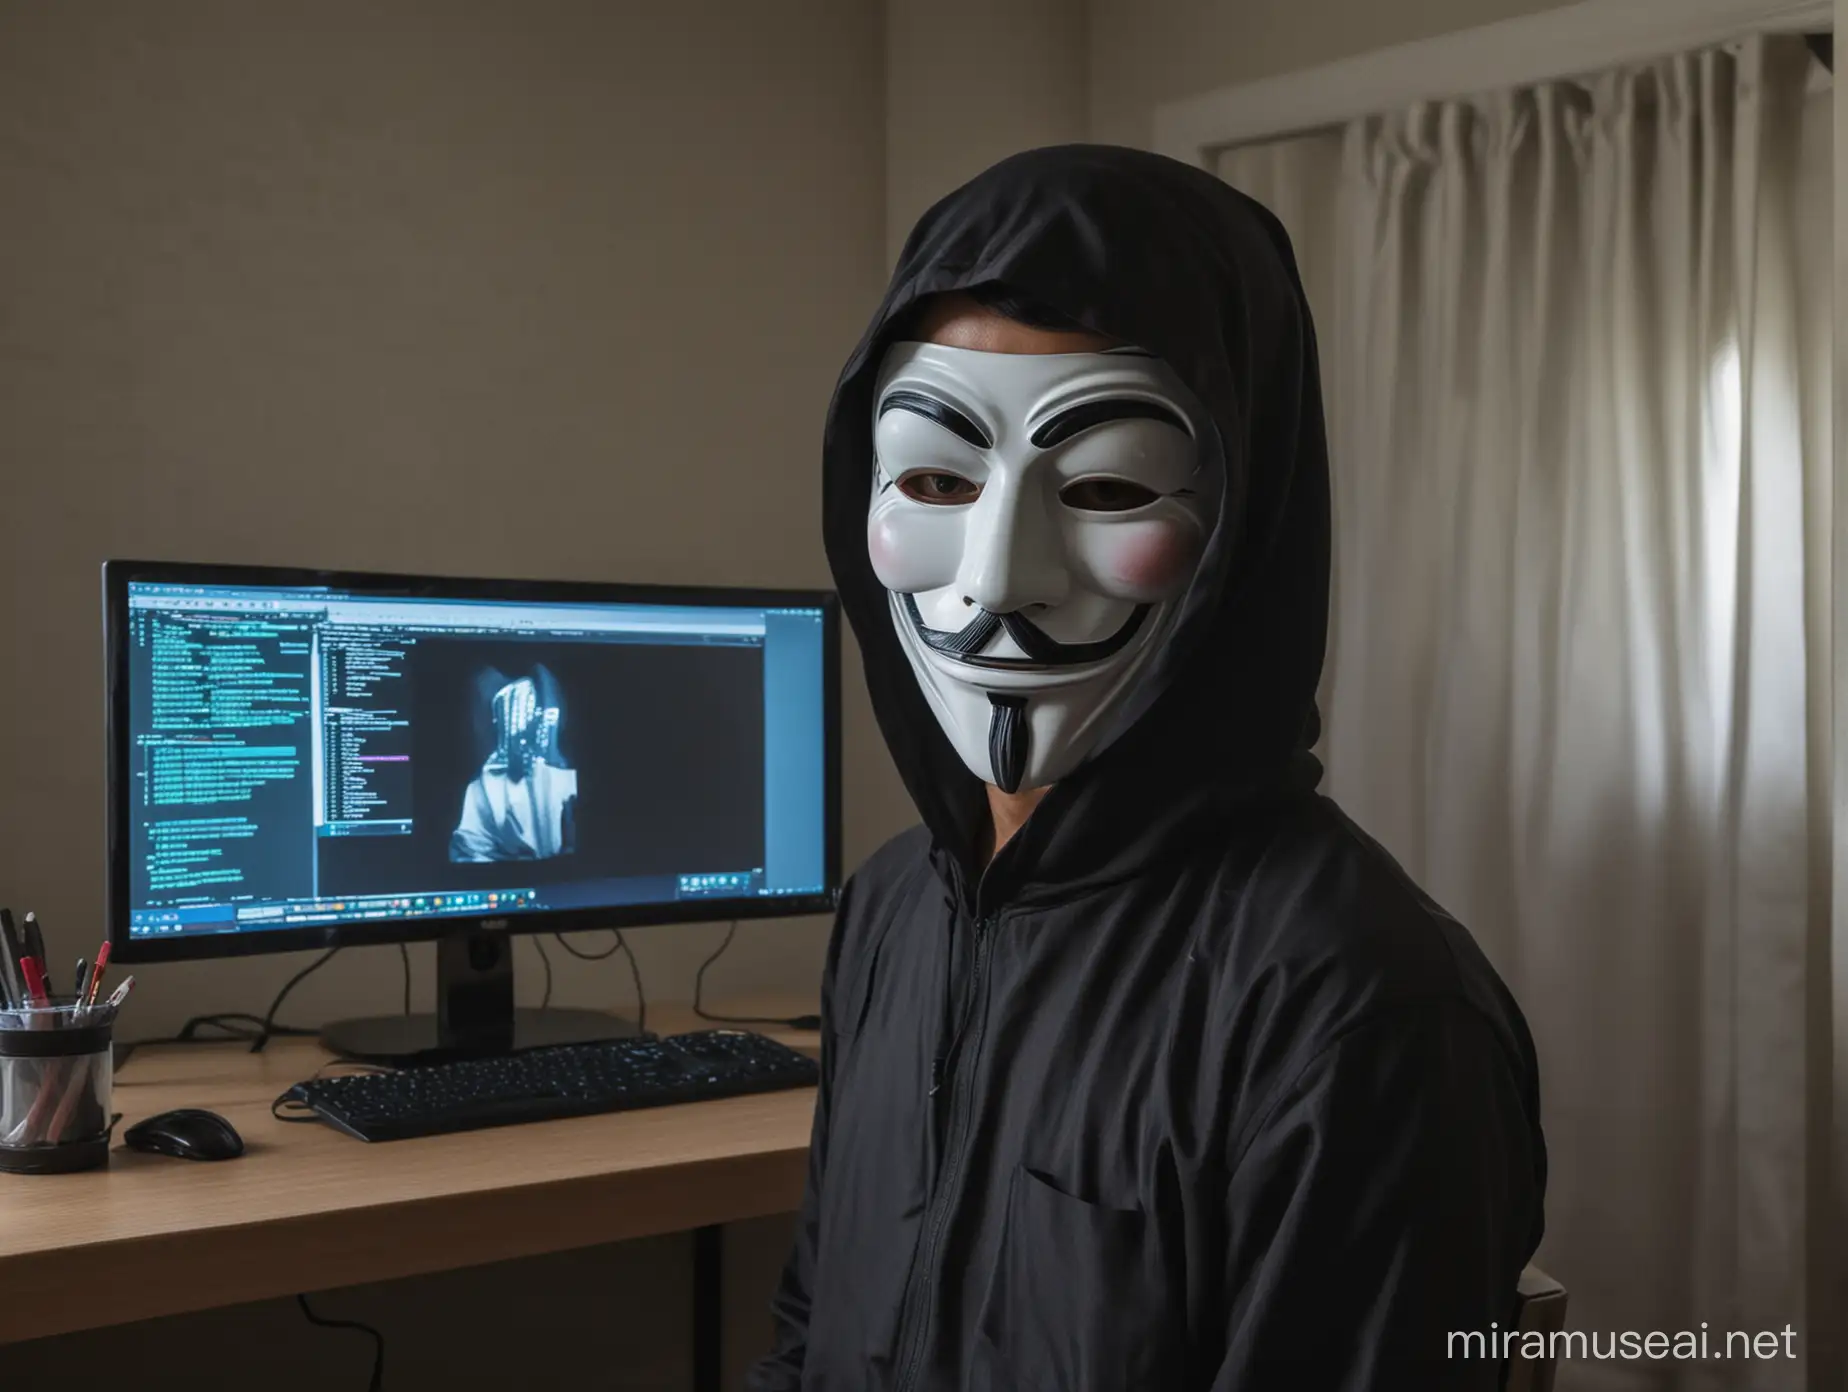 Indonesian Man Wearing Anonymous Mask Hacking on PC in Bedroom